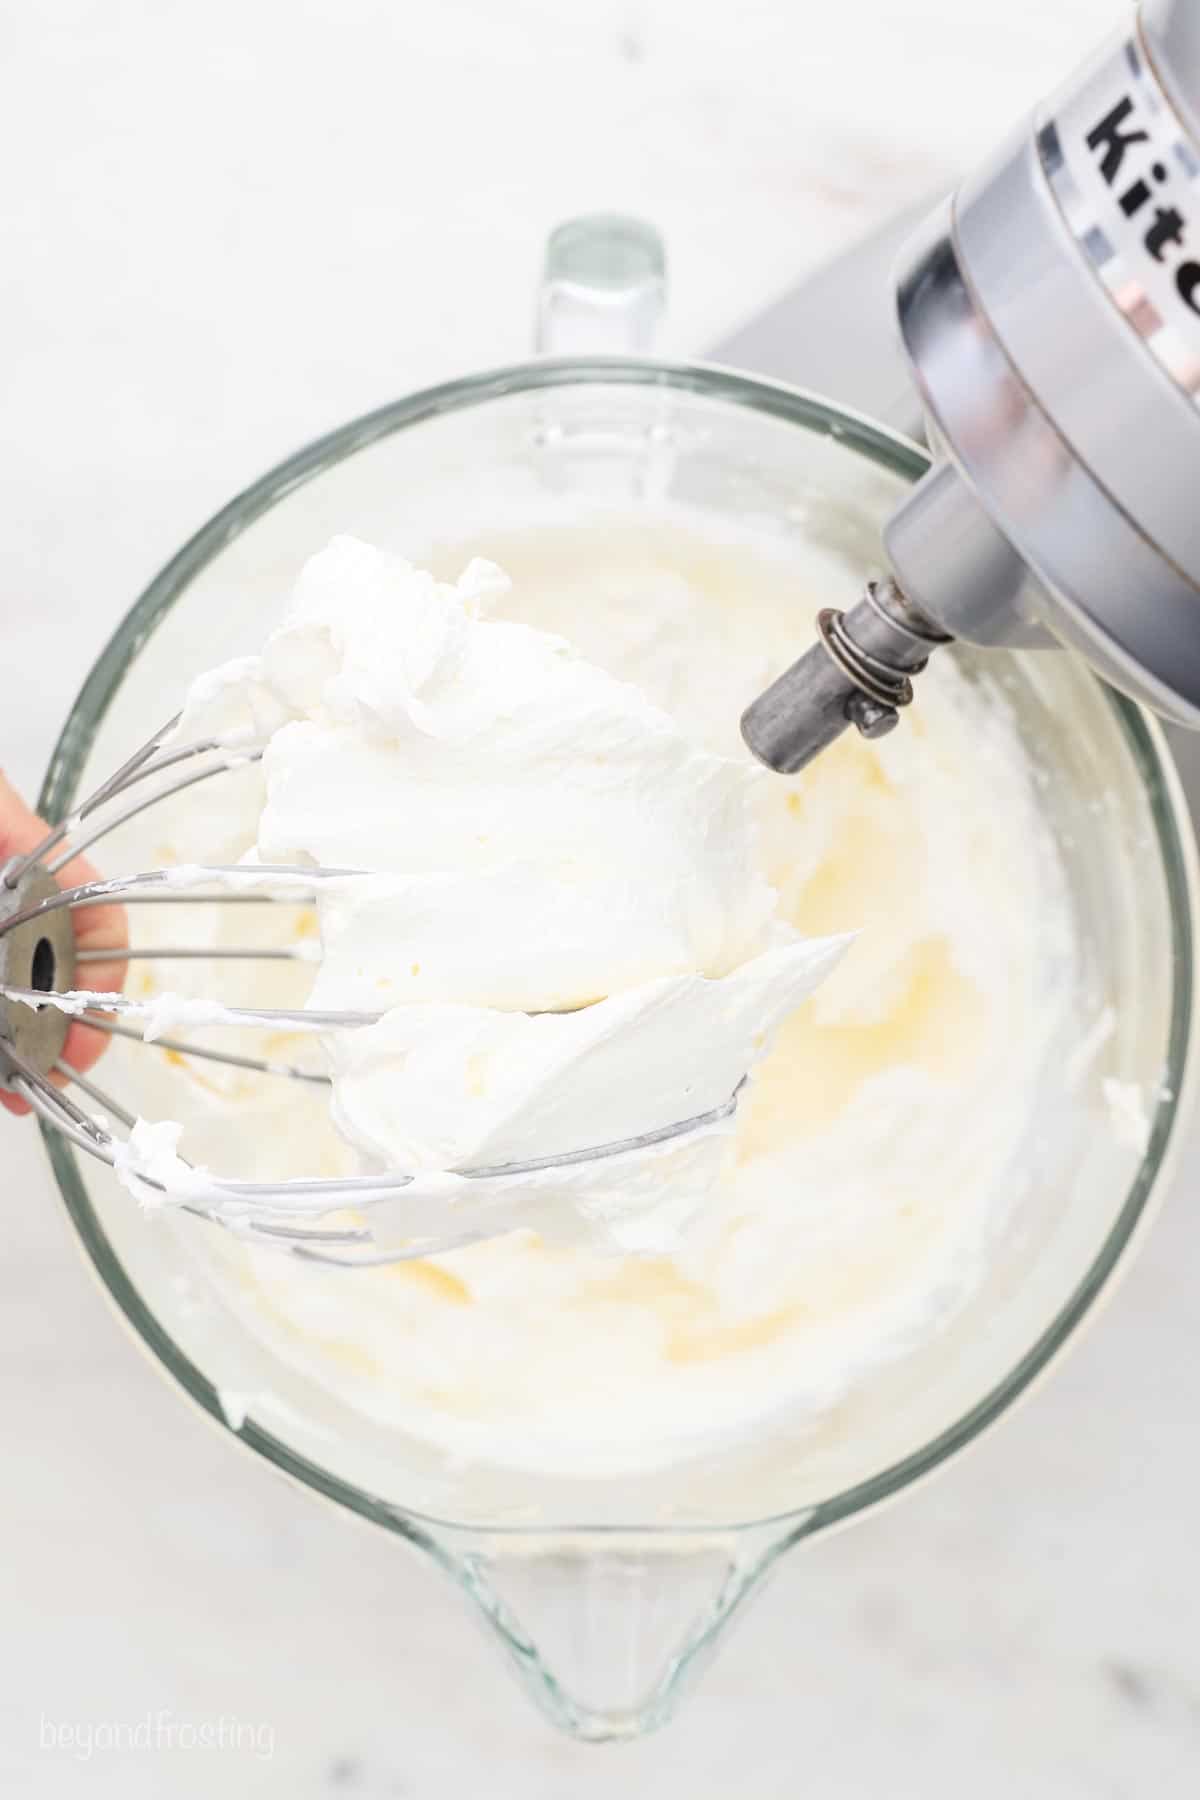 The heavy whipping cream and the cream cheese mixed.